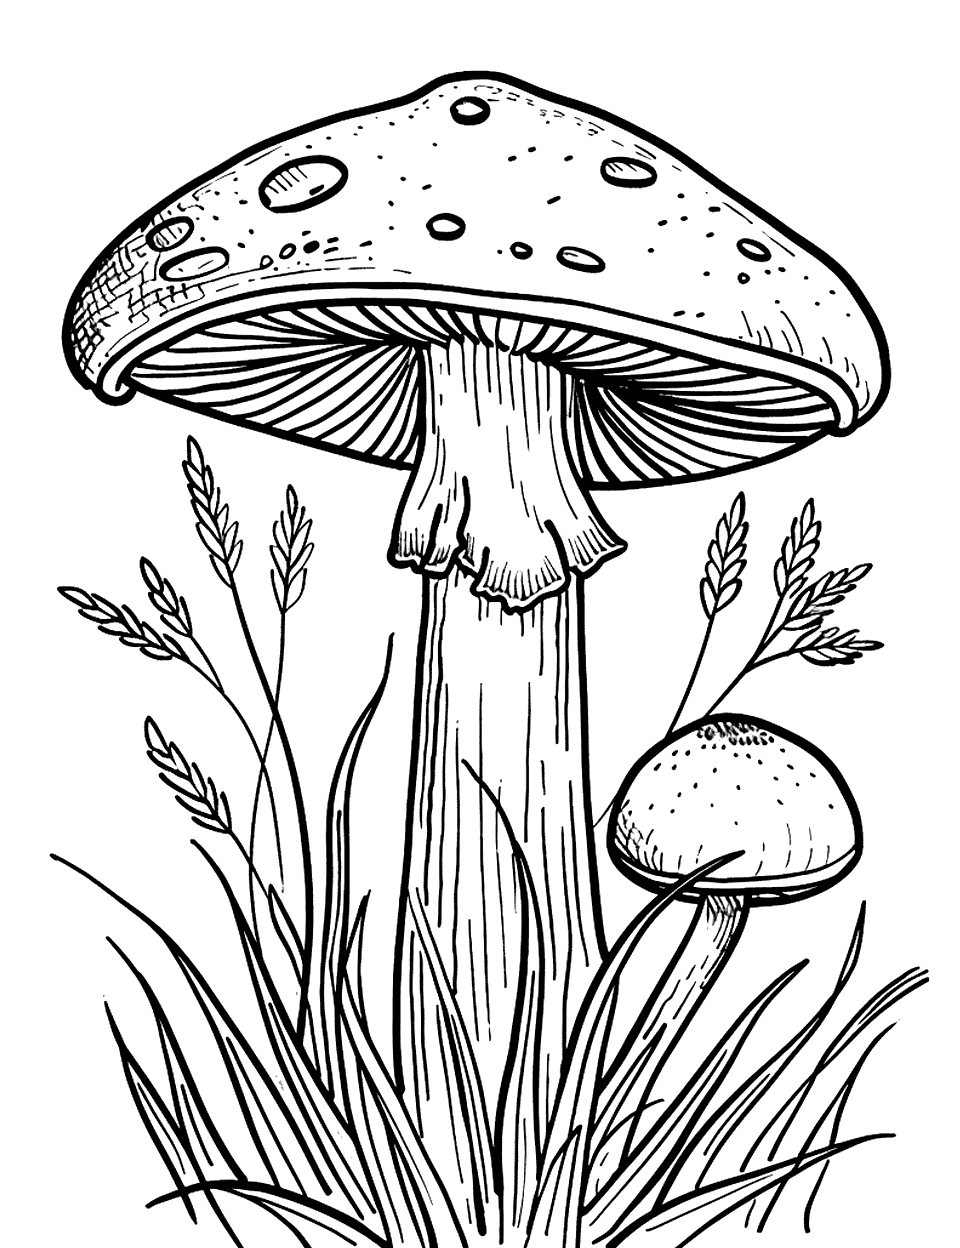 Tall Grass and Mushrooms Mushroom Coloring Page - Mushrooms stand tall among wispy strands of grass.